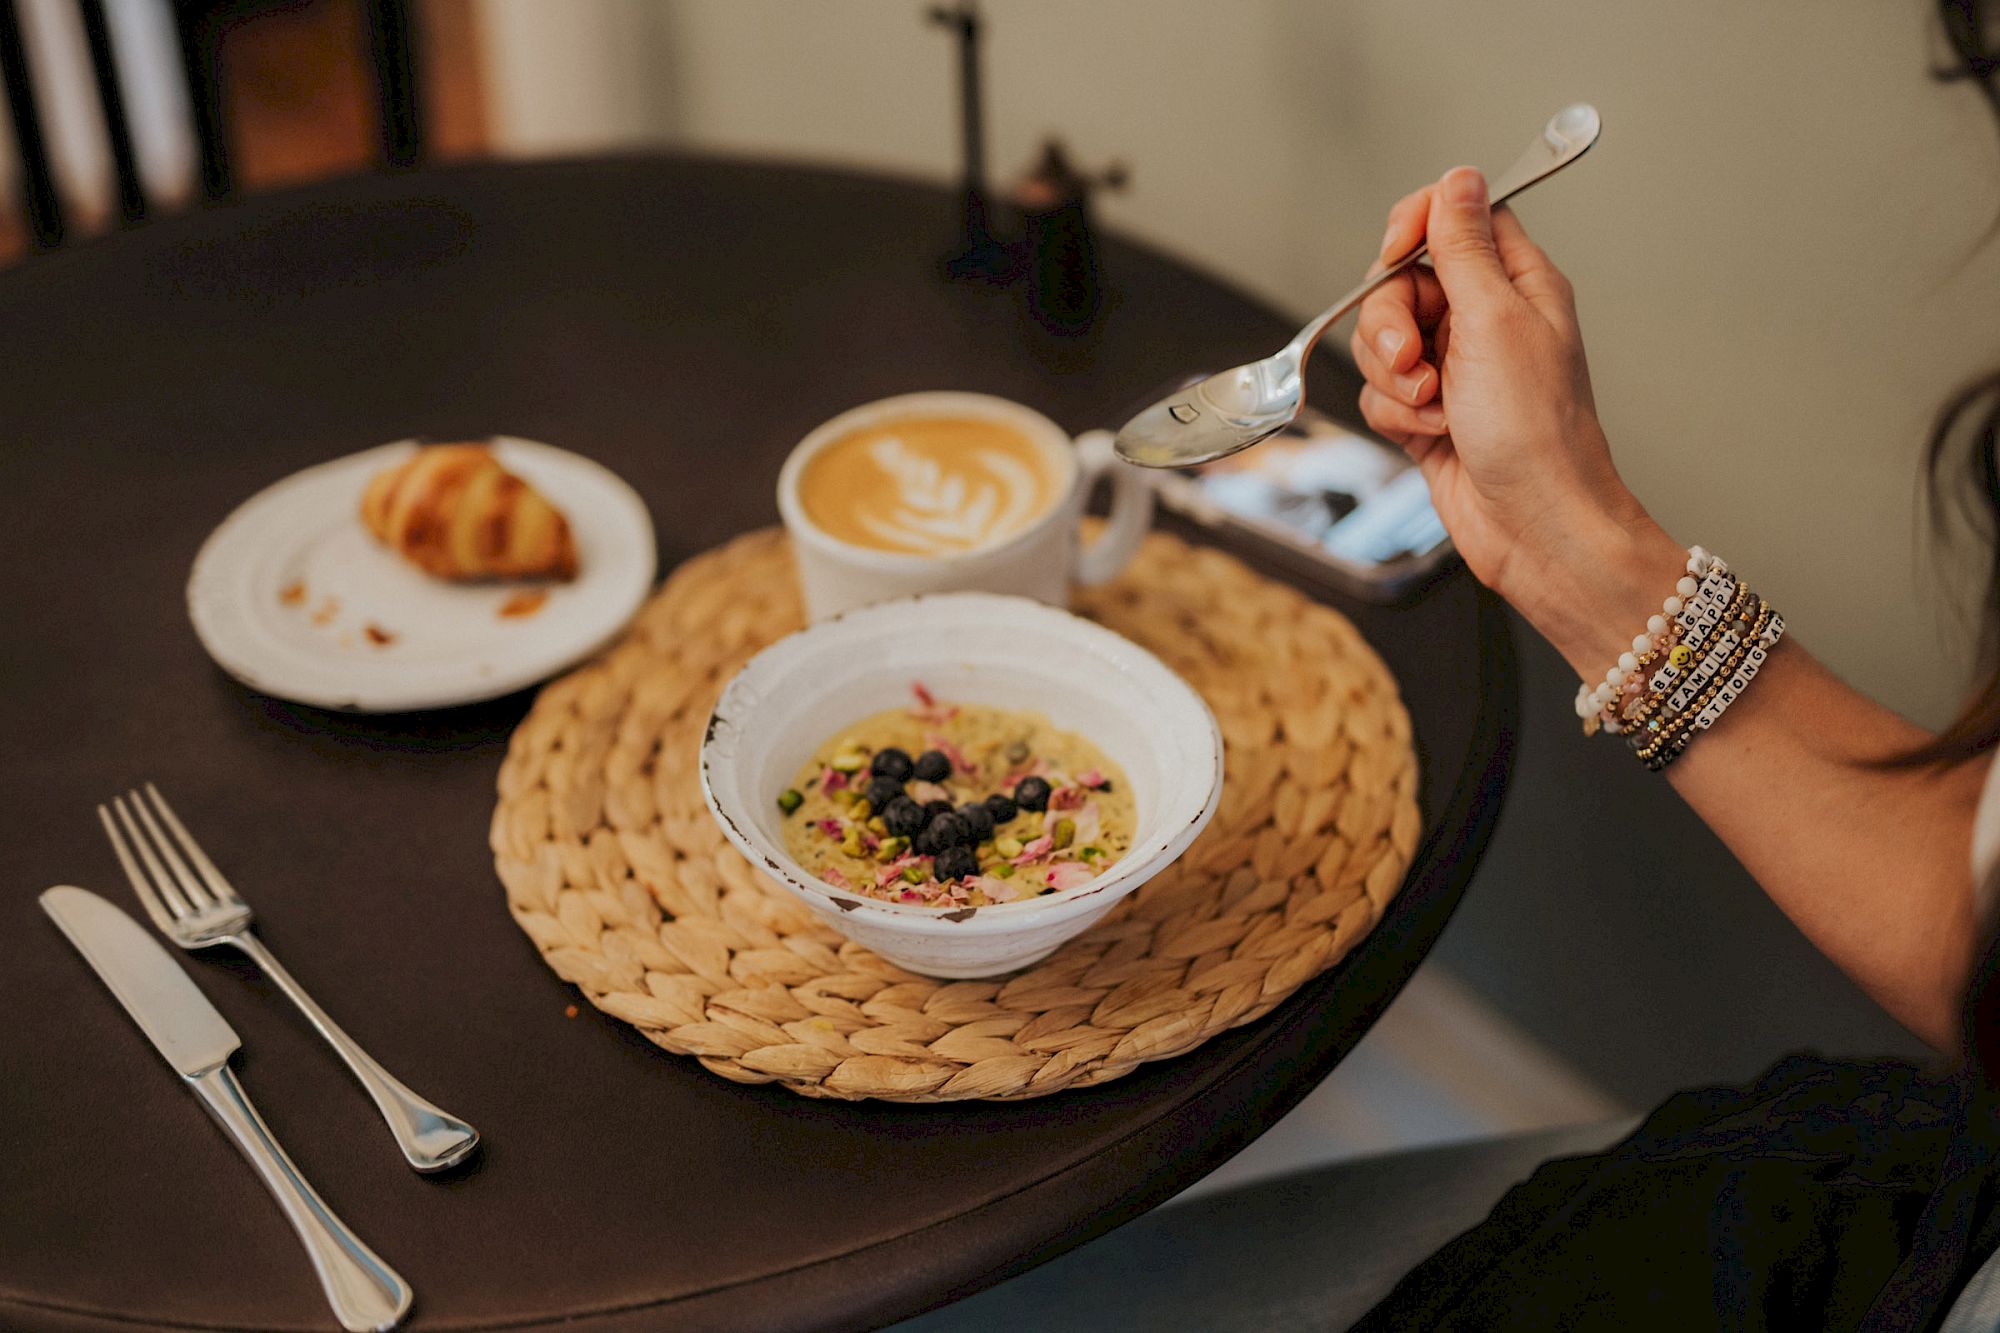 A person is having breakfast with a bowl of oatmeal topped with berries, a croissant, and a cup of coffee on a table with utensils.